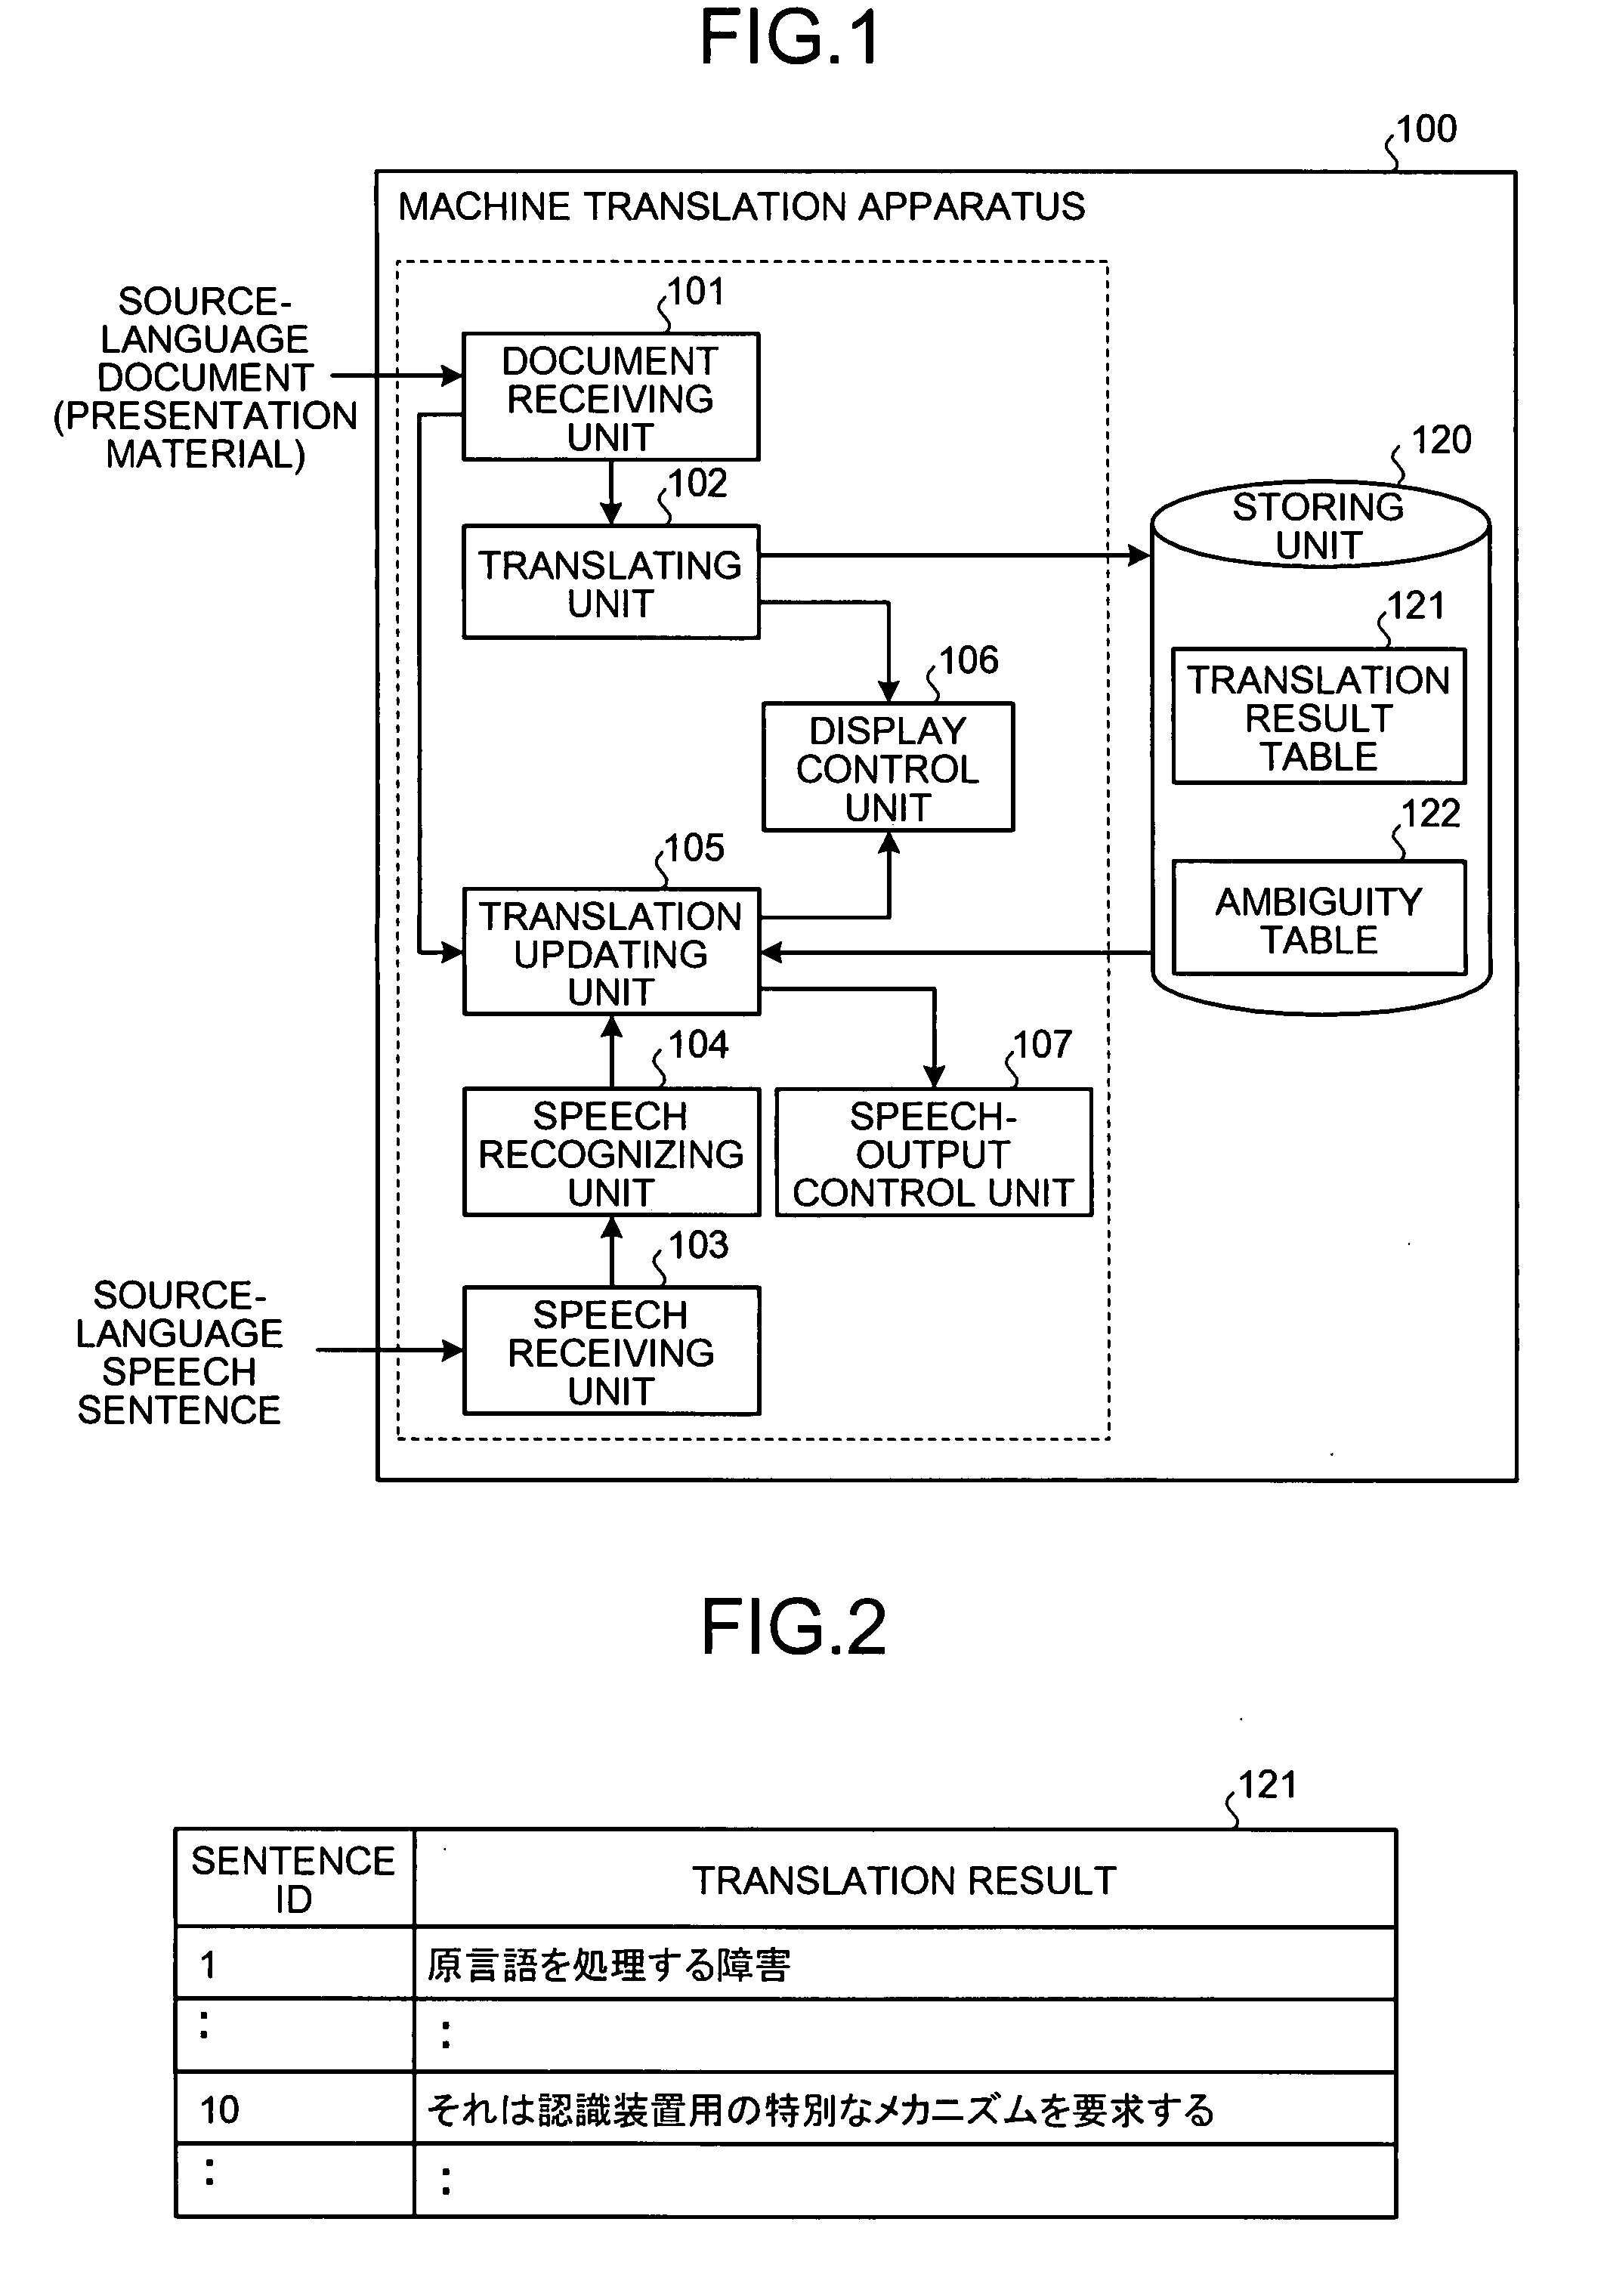 Method, apparatus, system, and computer program product for machine translation